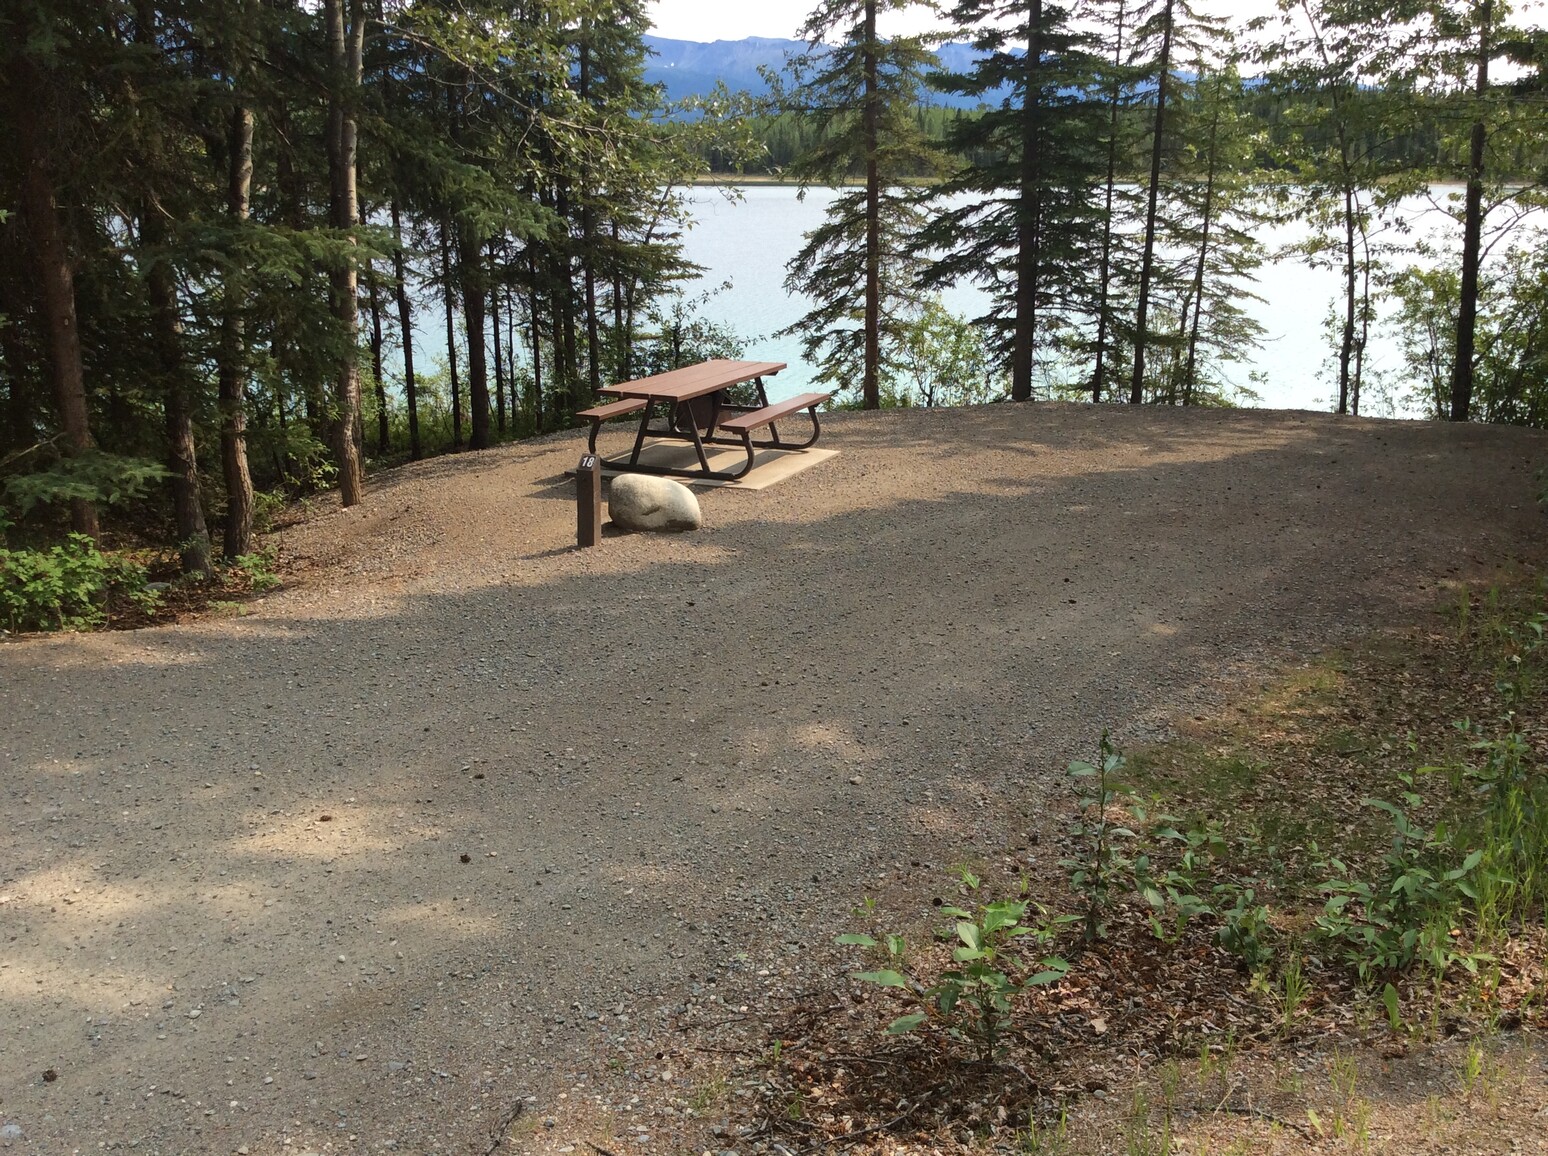 A gravel campsite with a picnic table overlooking the lake.